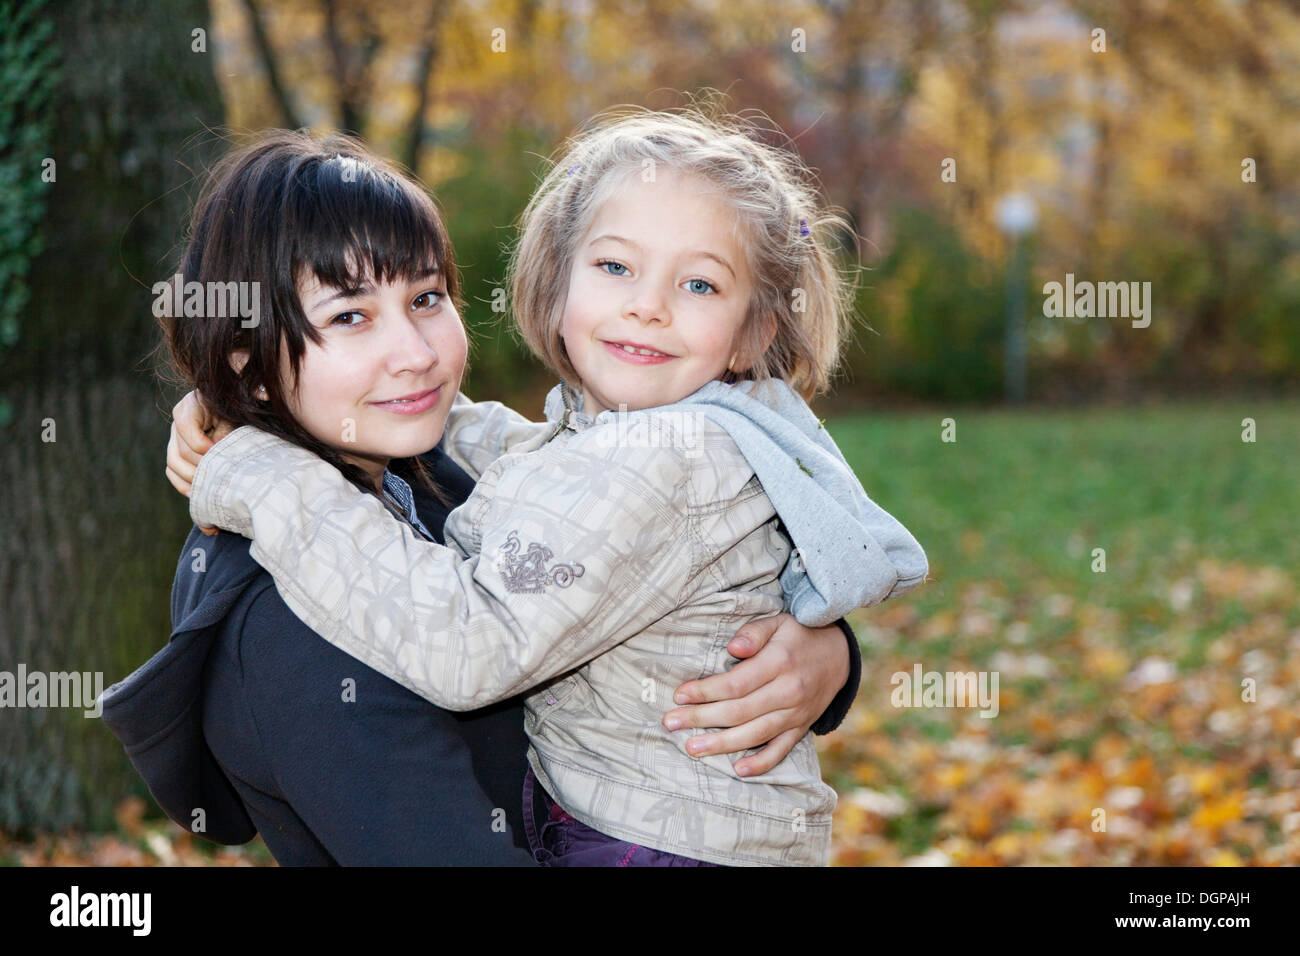 Teenage girl, 14 years, holding girl, 6 years, in her arms Stock Photo